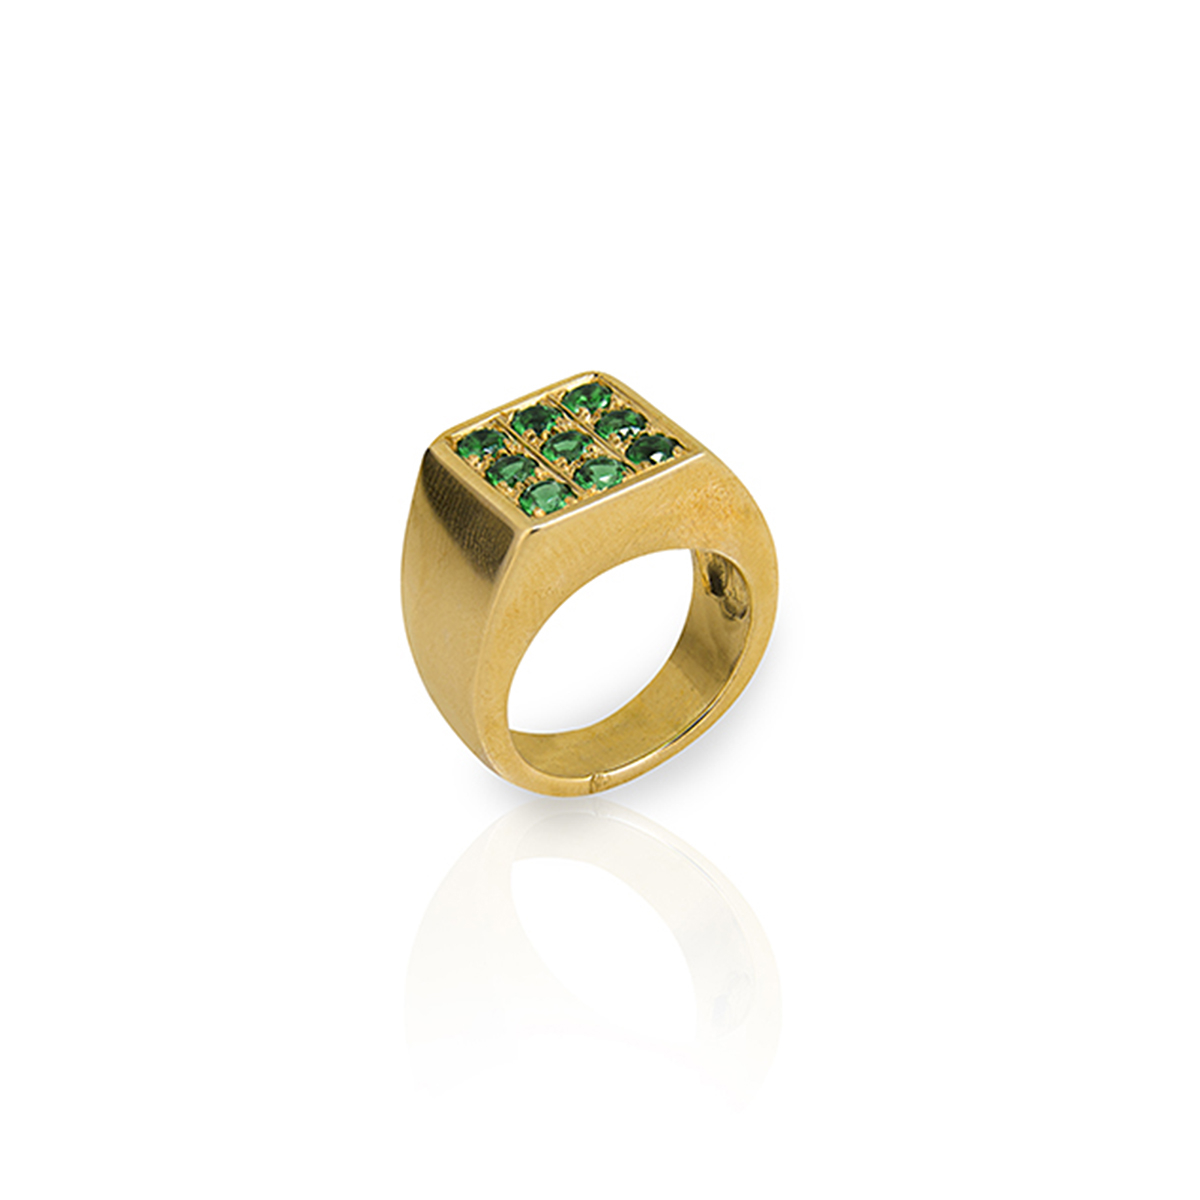 Square ring in bronze paved with green zircons